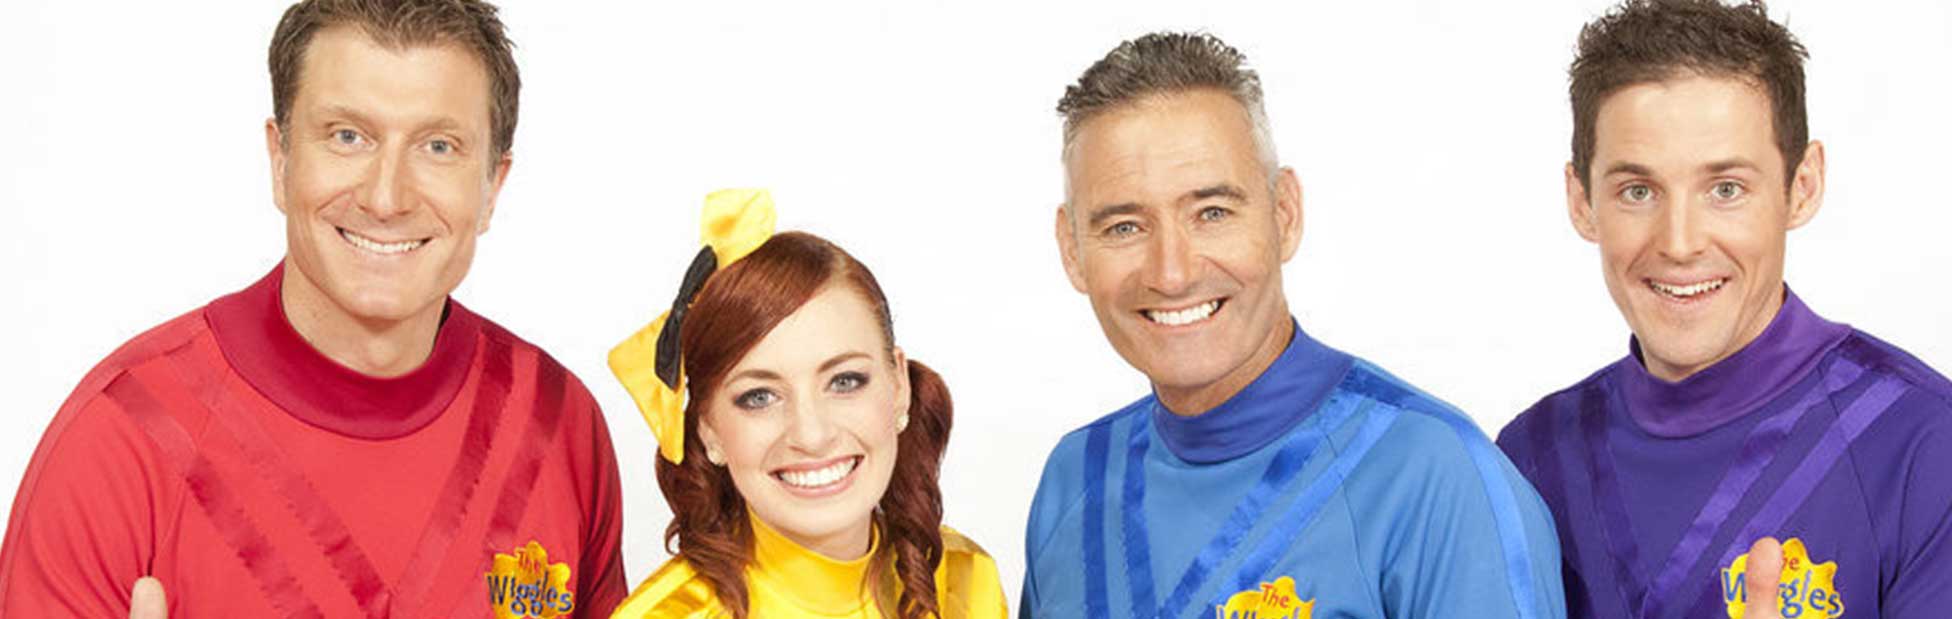 The Wiggles group shot